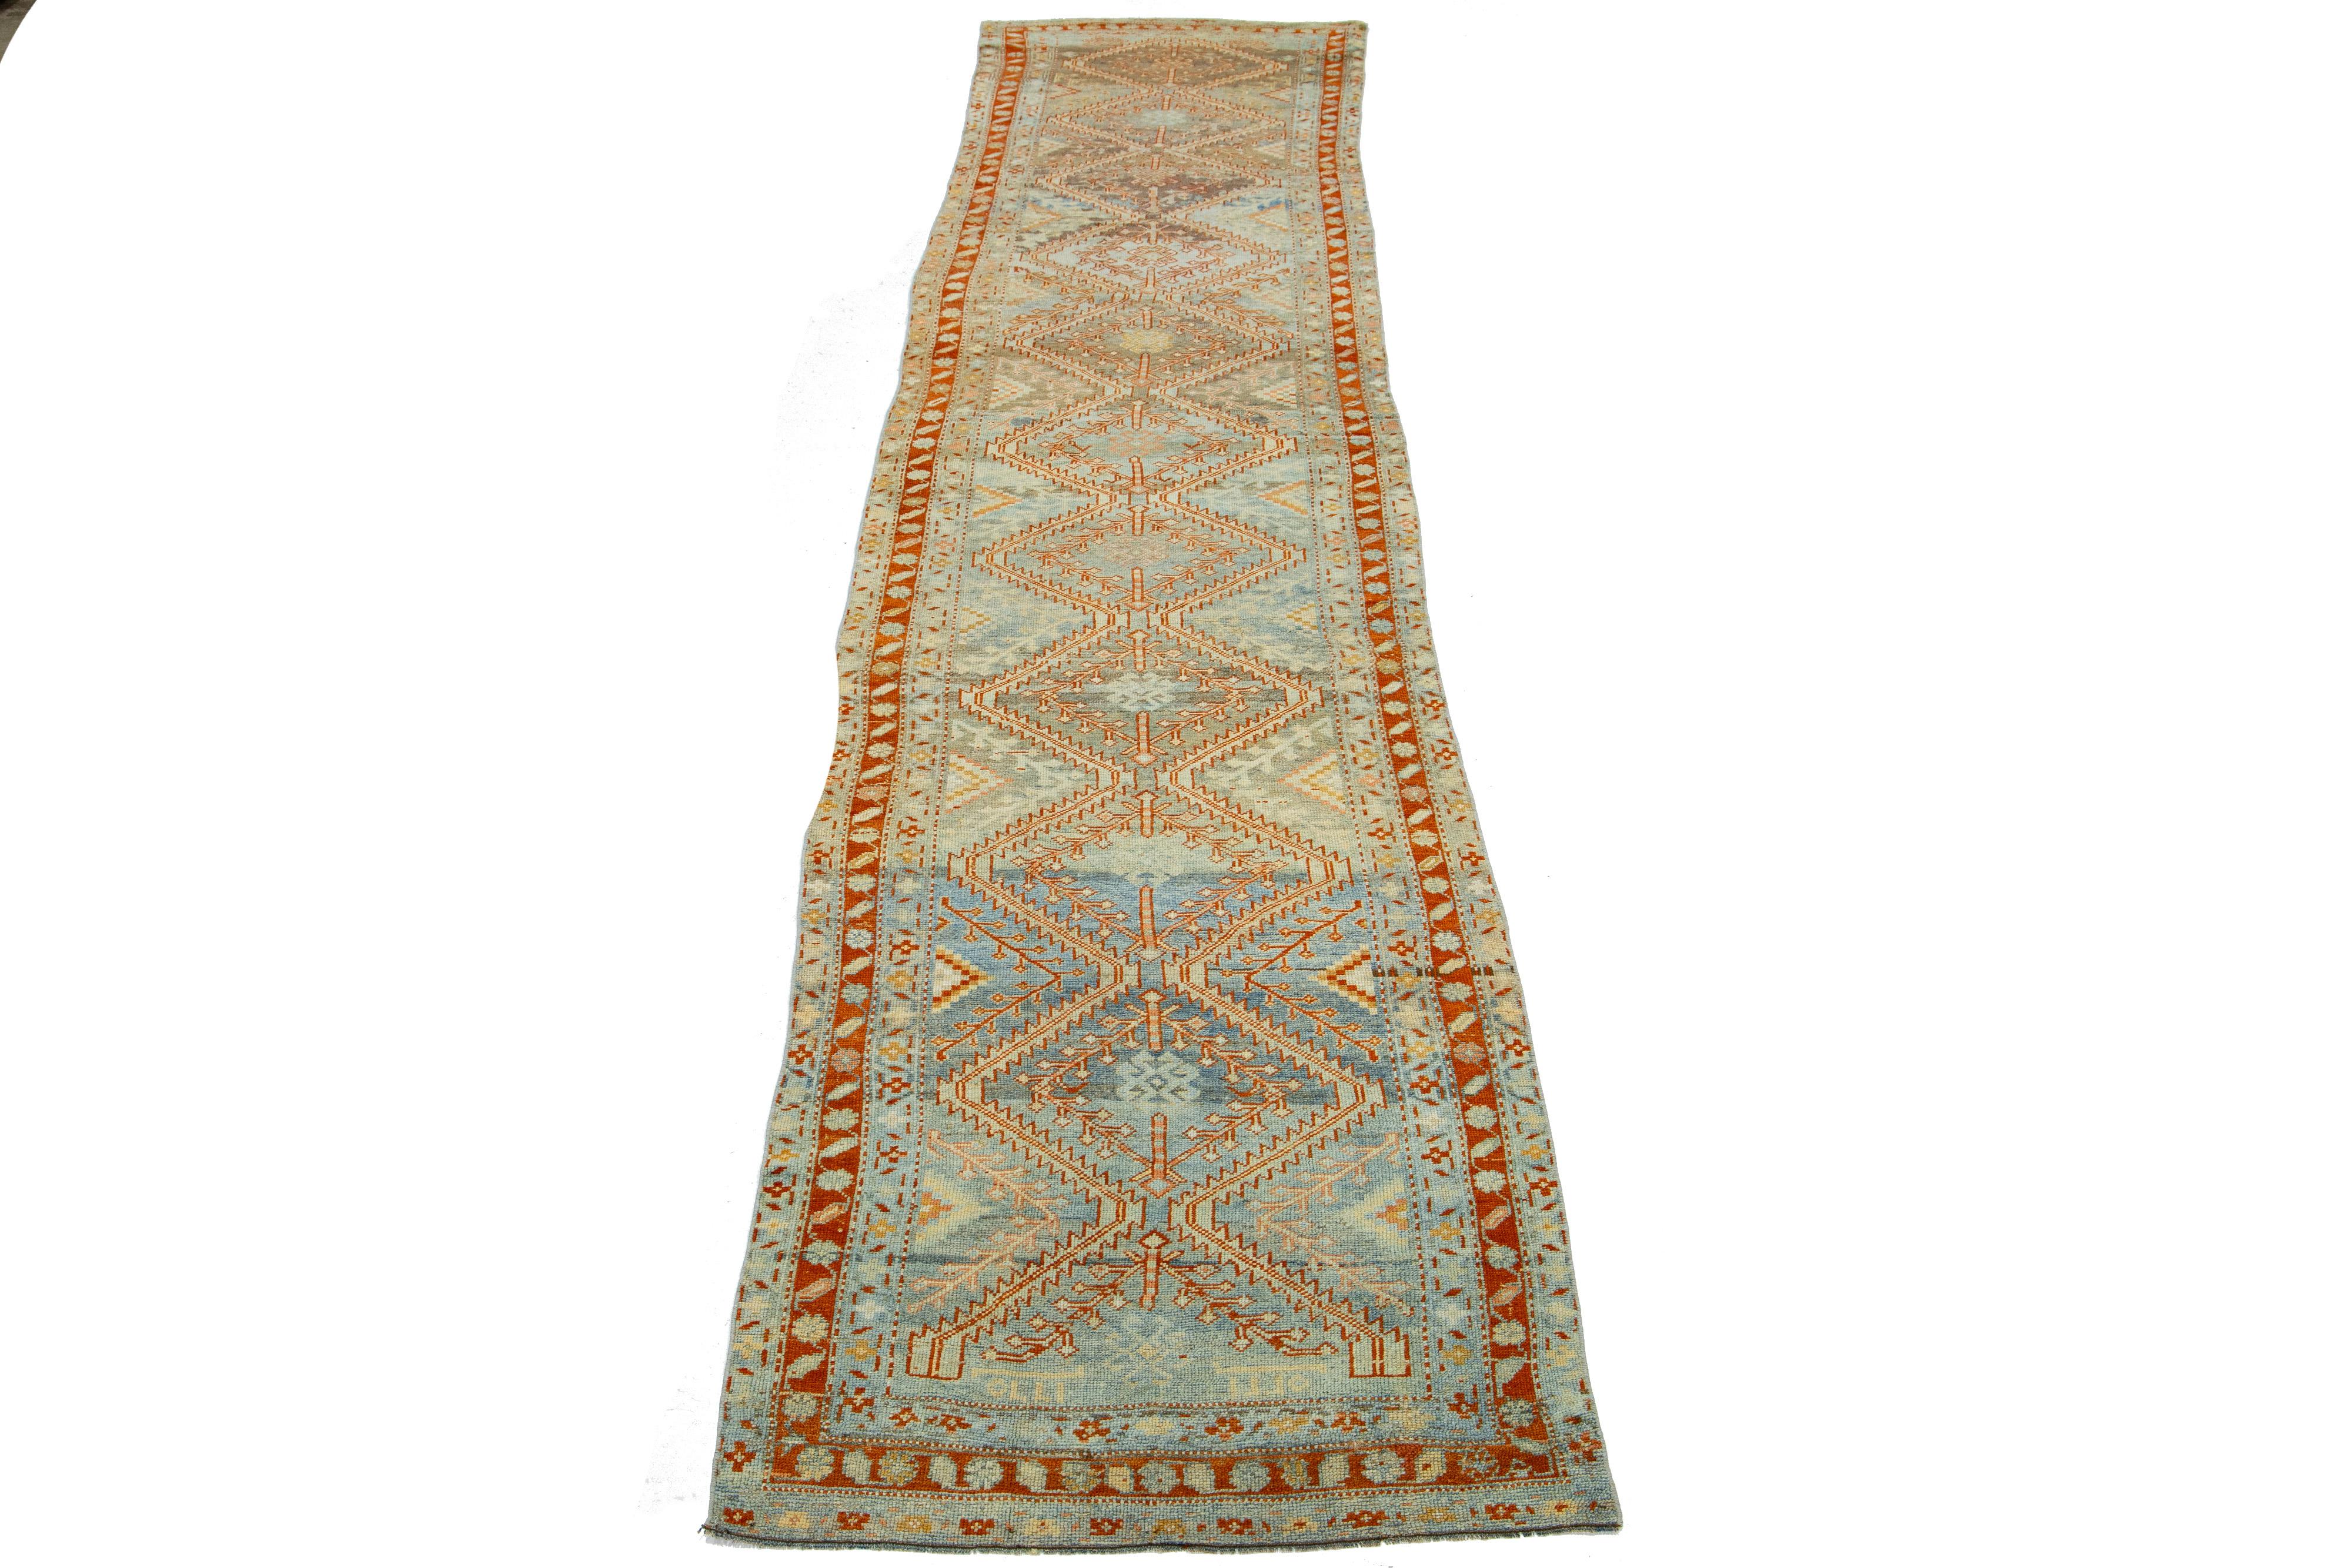 Beautiful antique Malayer Persian runner rug with a light blue field. This piece has rust accents with an all-over tribal floral design. 

This rug measures 3'4